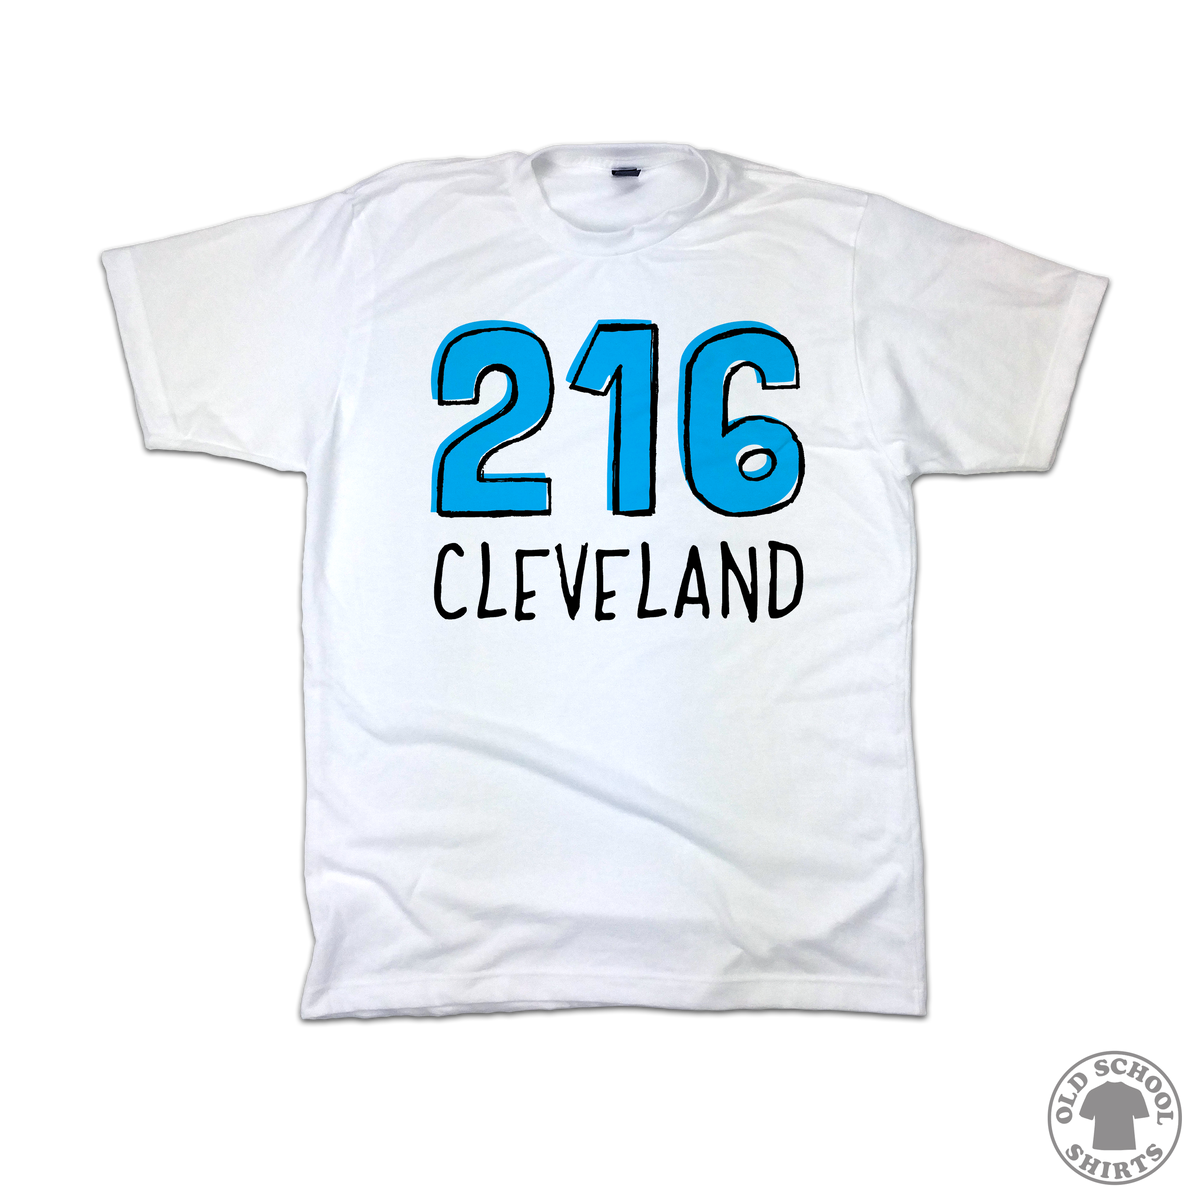 Cleveland 216 Area Code - Youth Sizes - Old School Shirts- Retro Sports T Shirts